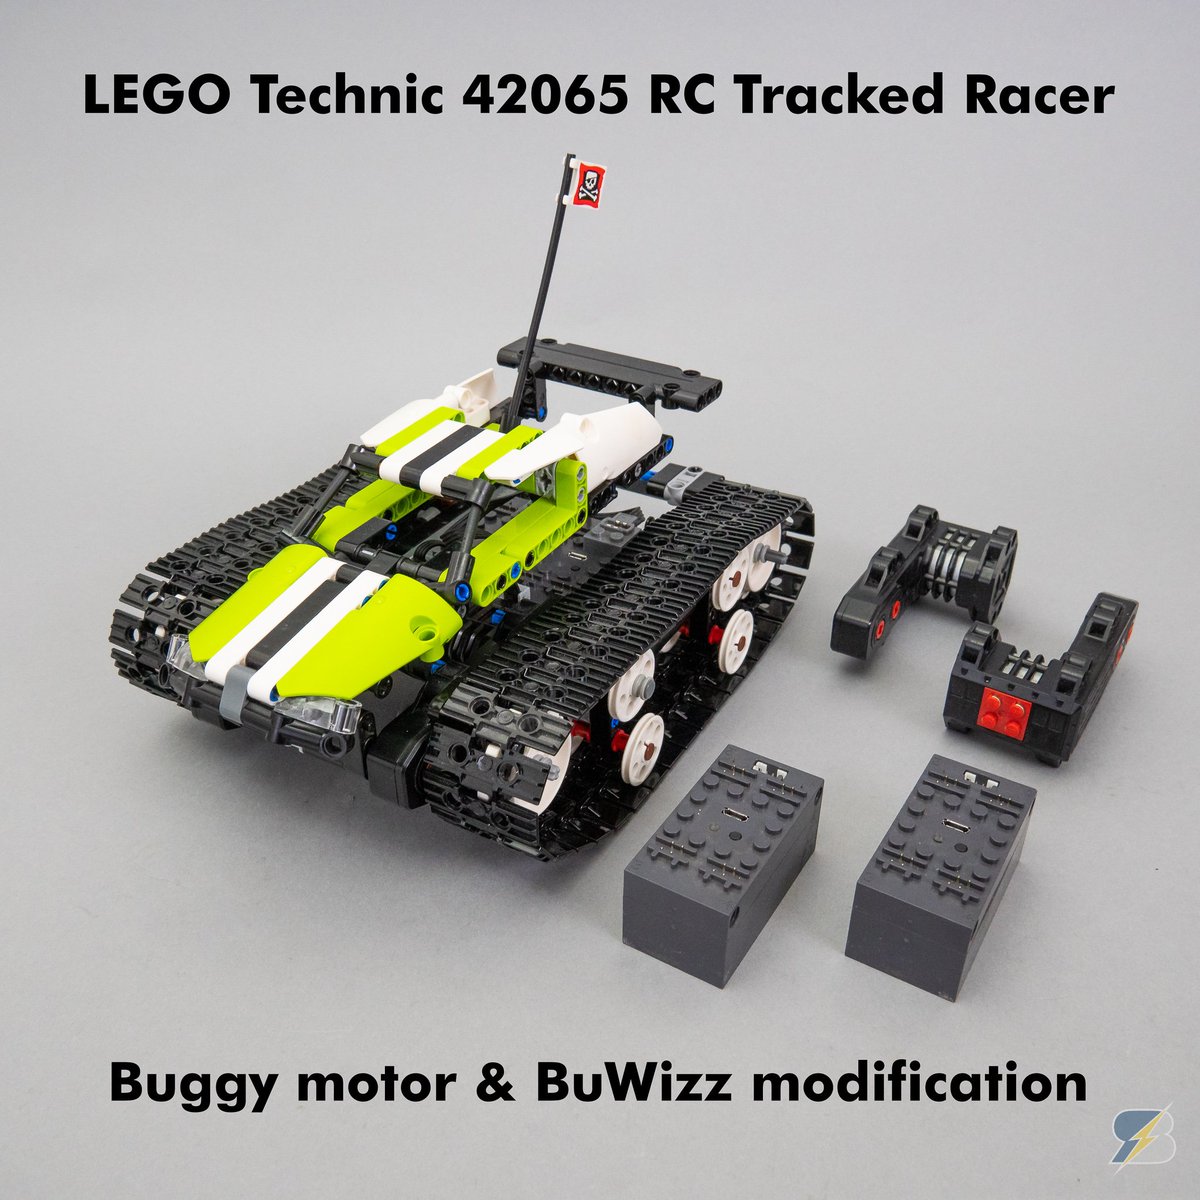 efterklang Fedt placere RacingBrick on Twitter: "The super fast LEGO Technic 42065 RC Tracked Racer  is here! Upgraded with 2 RC buggy motors and 2 BuWizz units, with free high  quality pdf instructions! - https://t.co/zPcXKjJdGU #